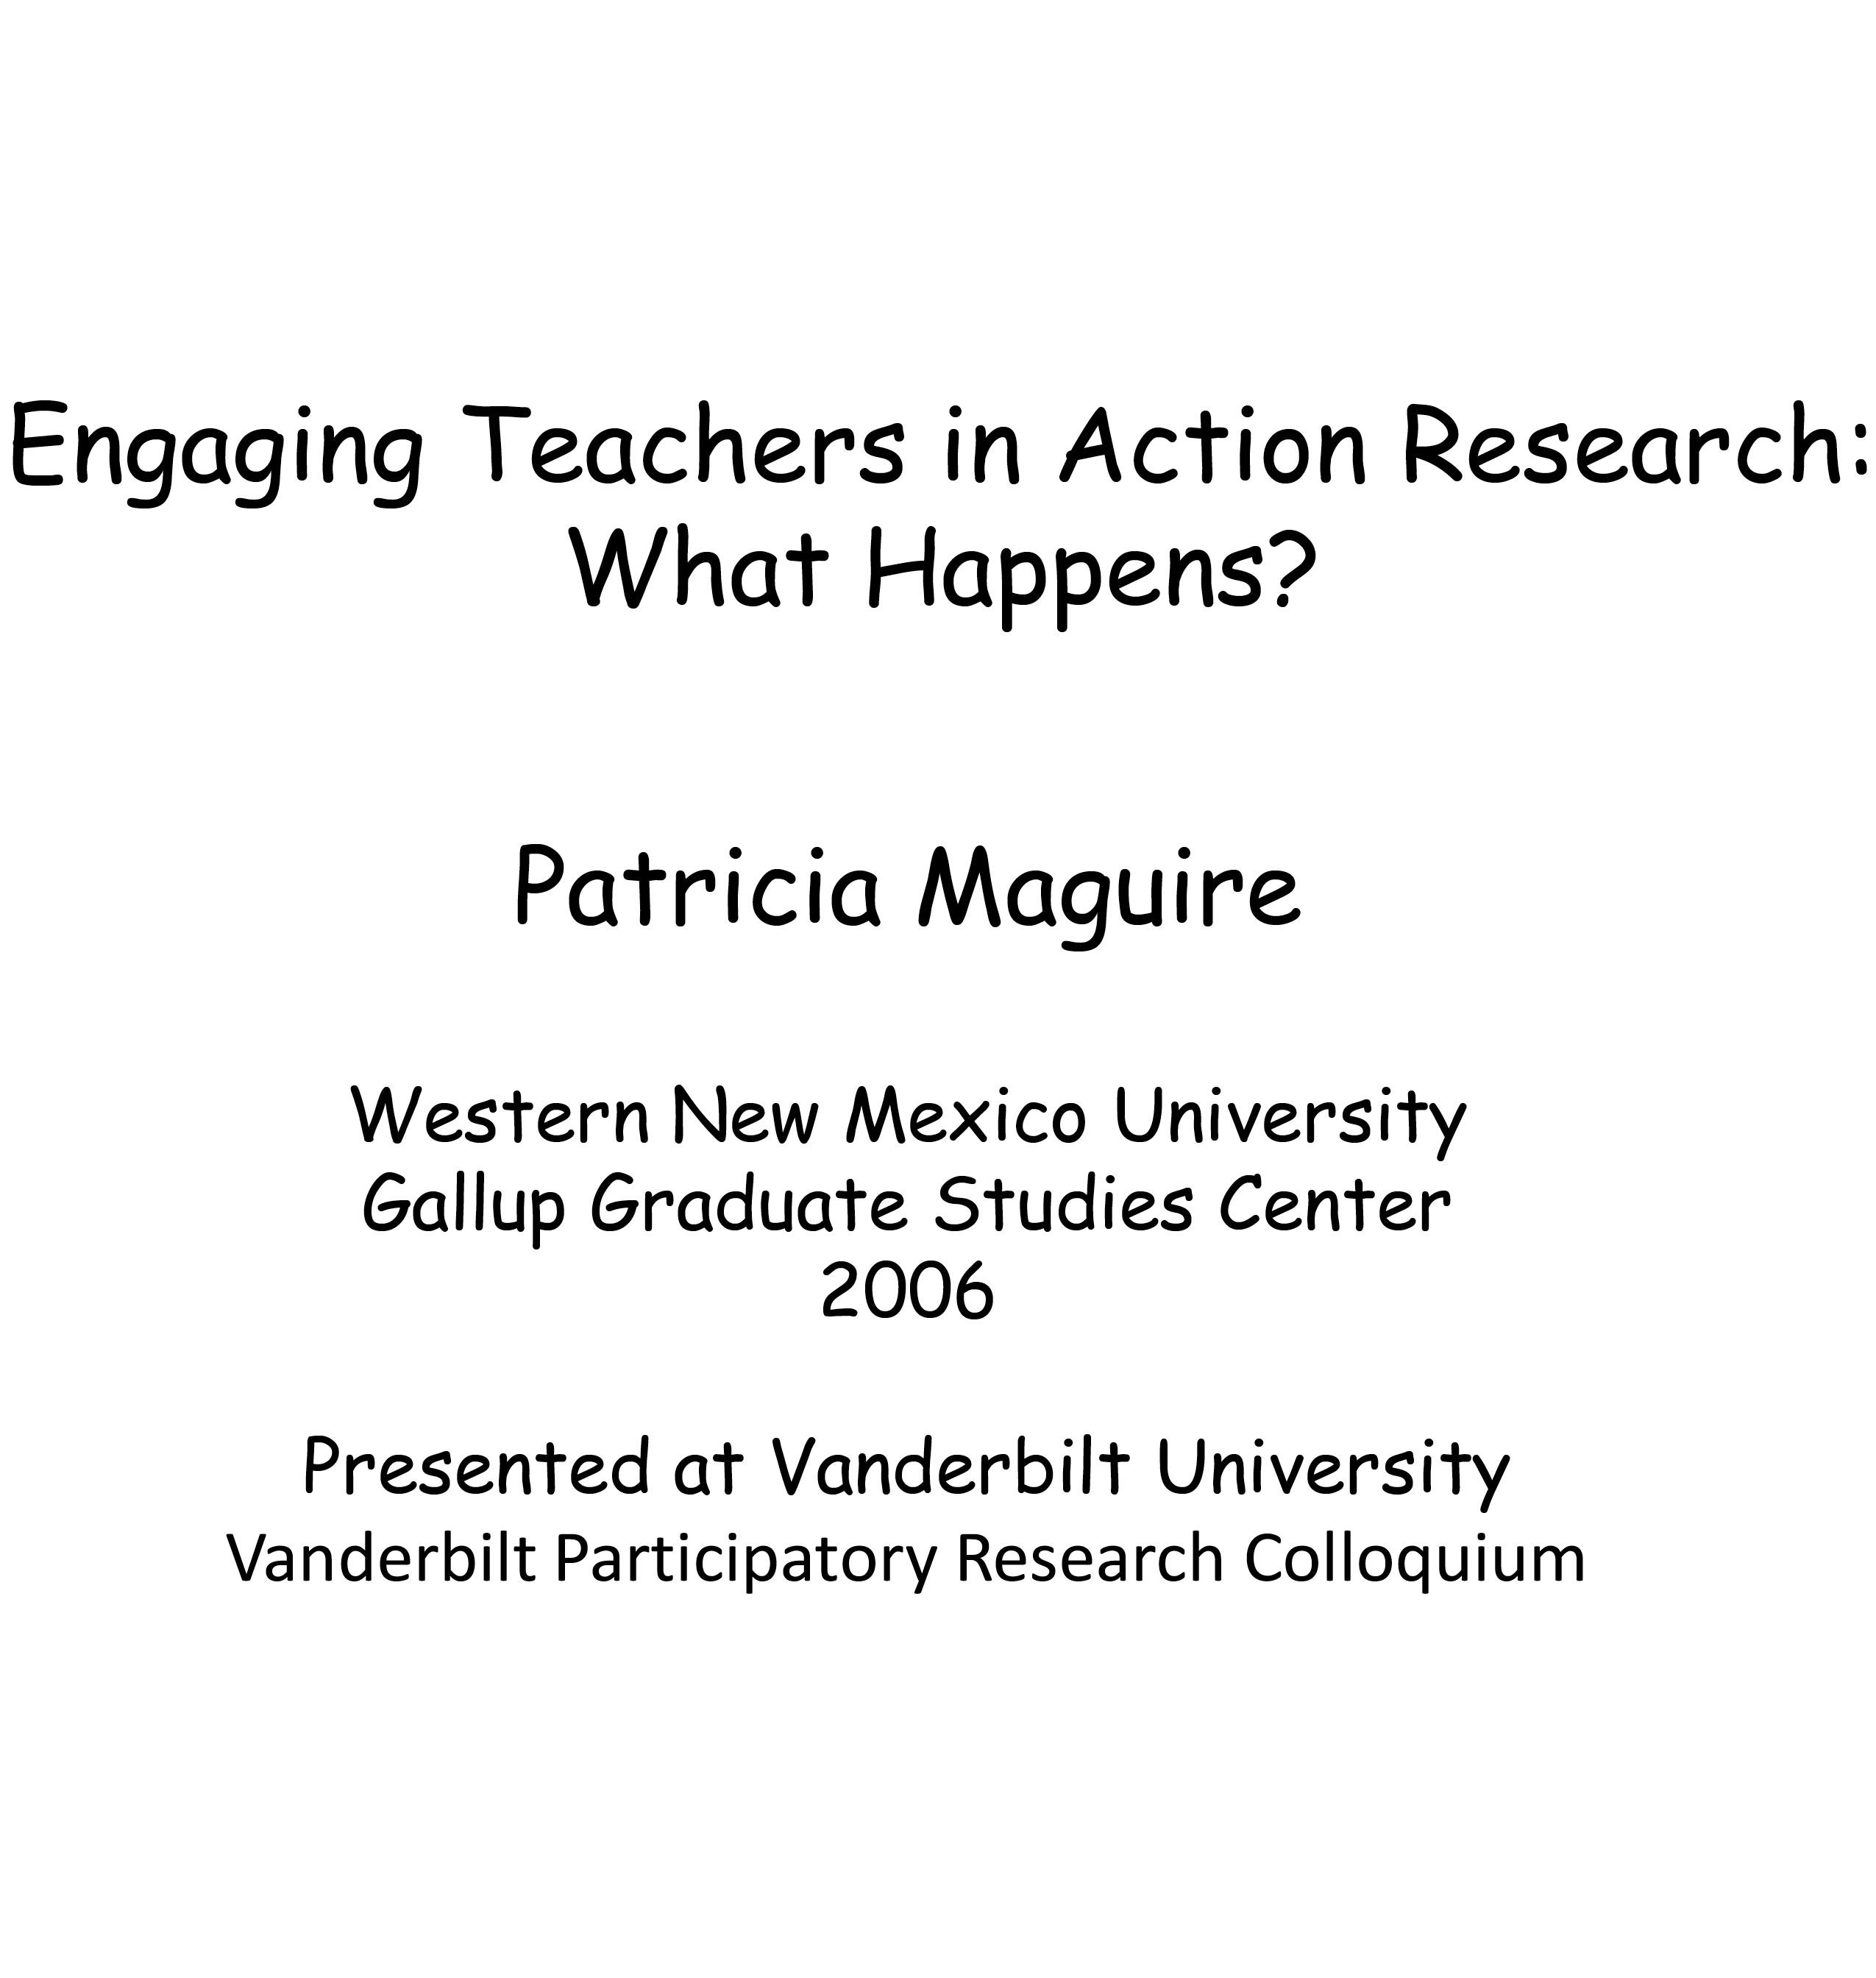 Engaging teachers in action research - What happens